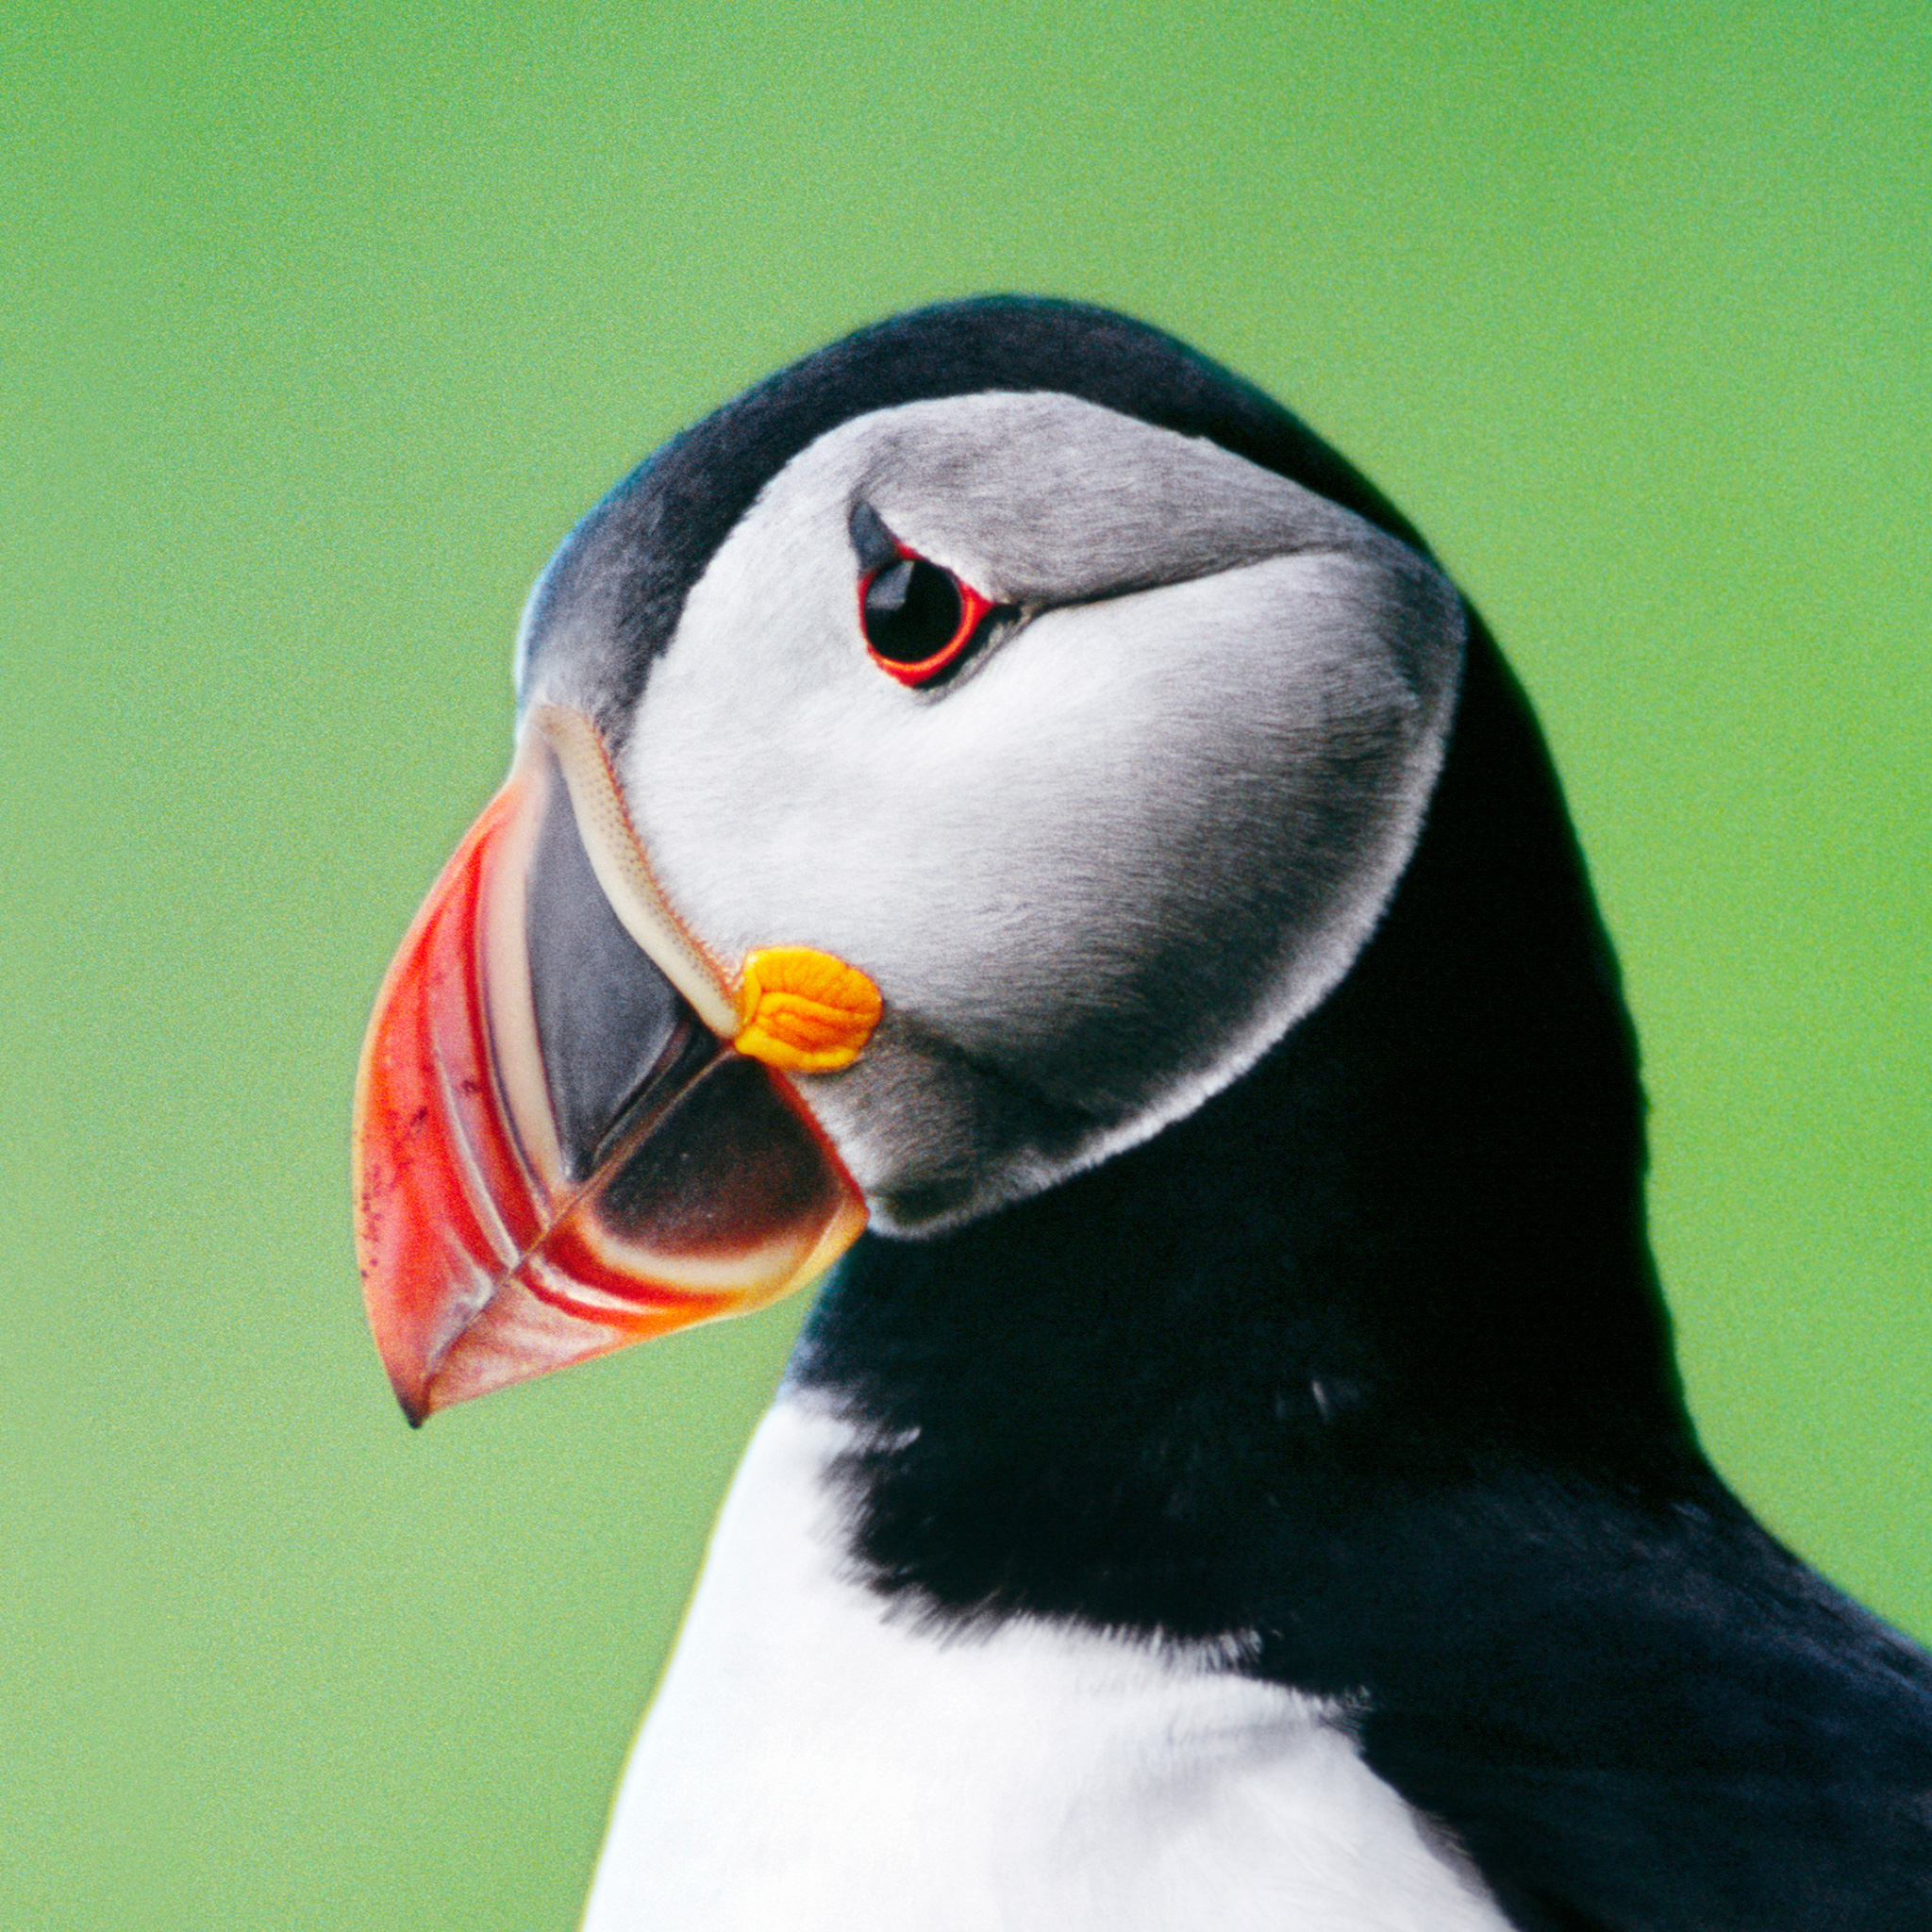 Atlantic Puffin | National Geographic